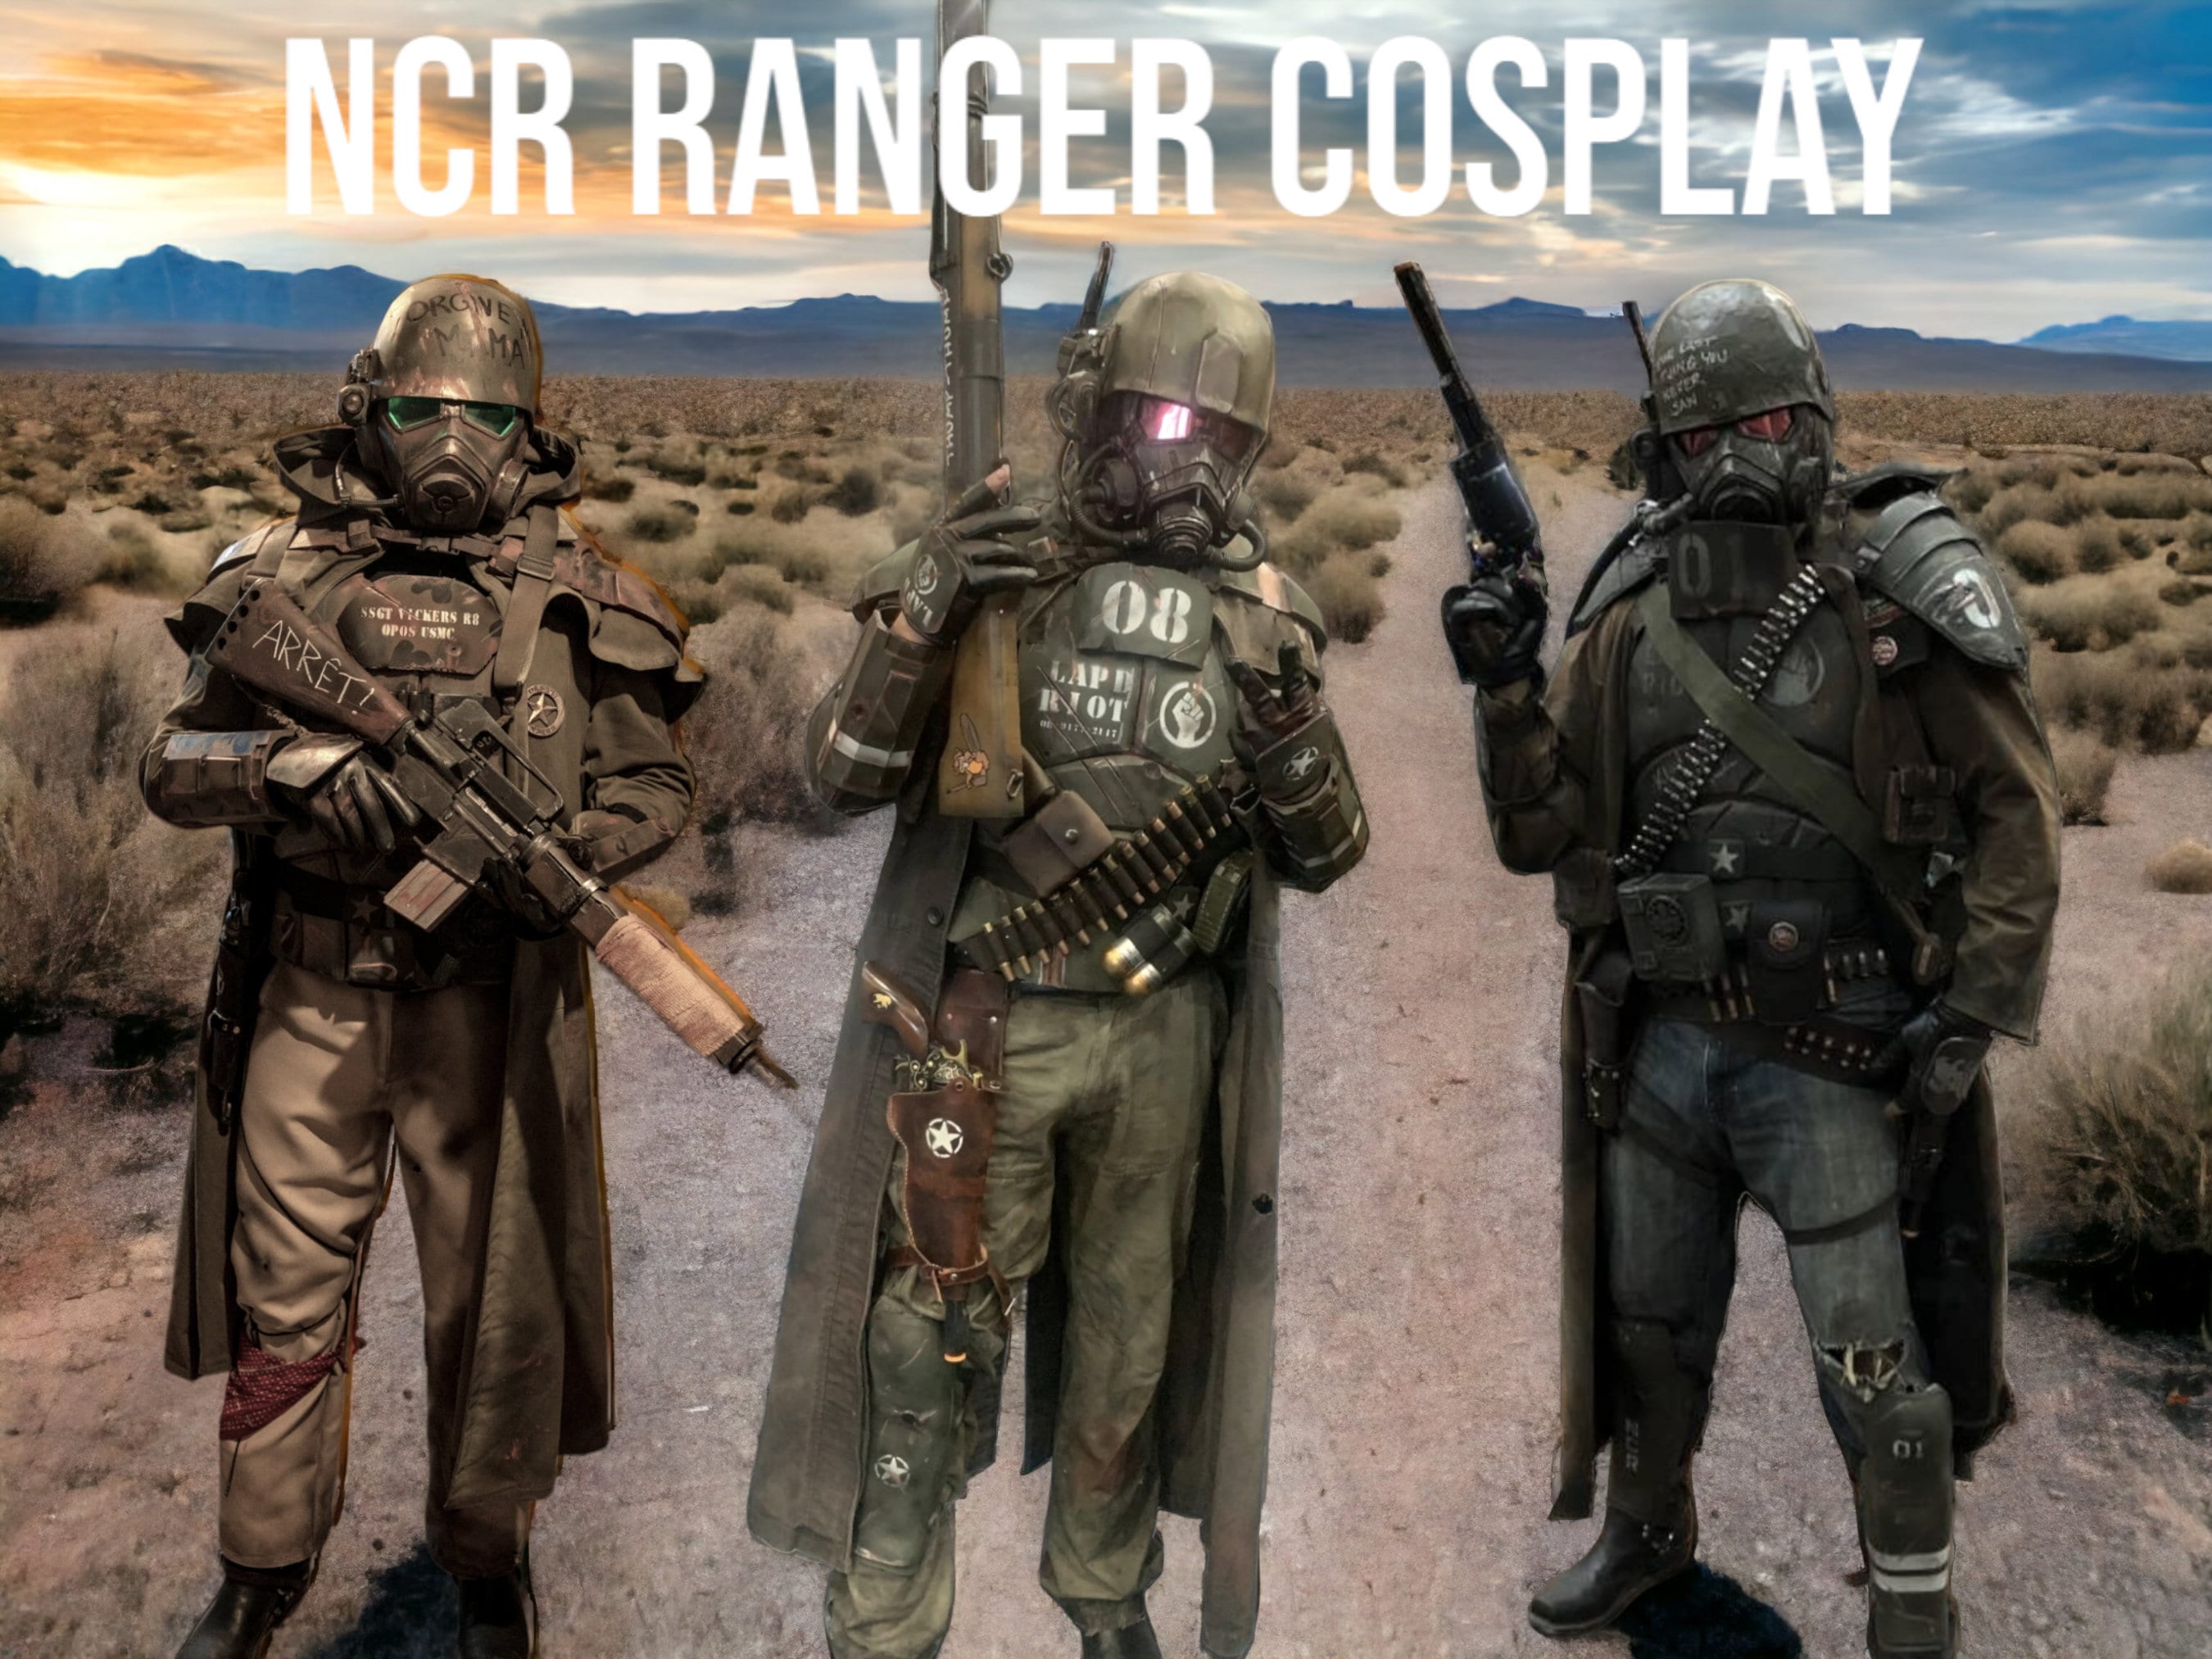 Ncr soldier cosplay